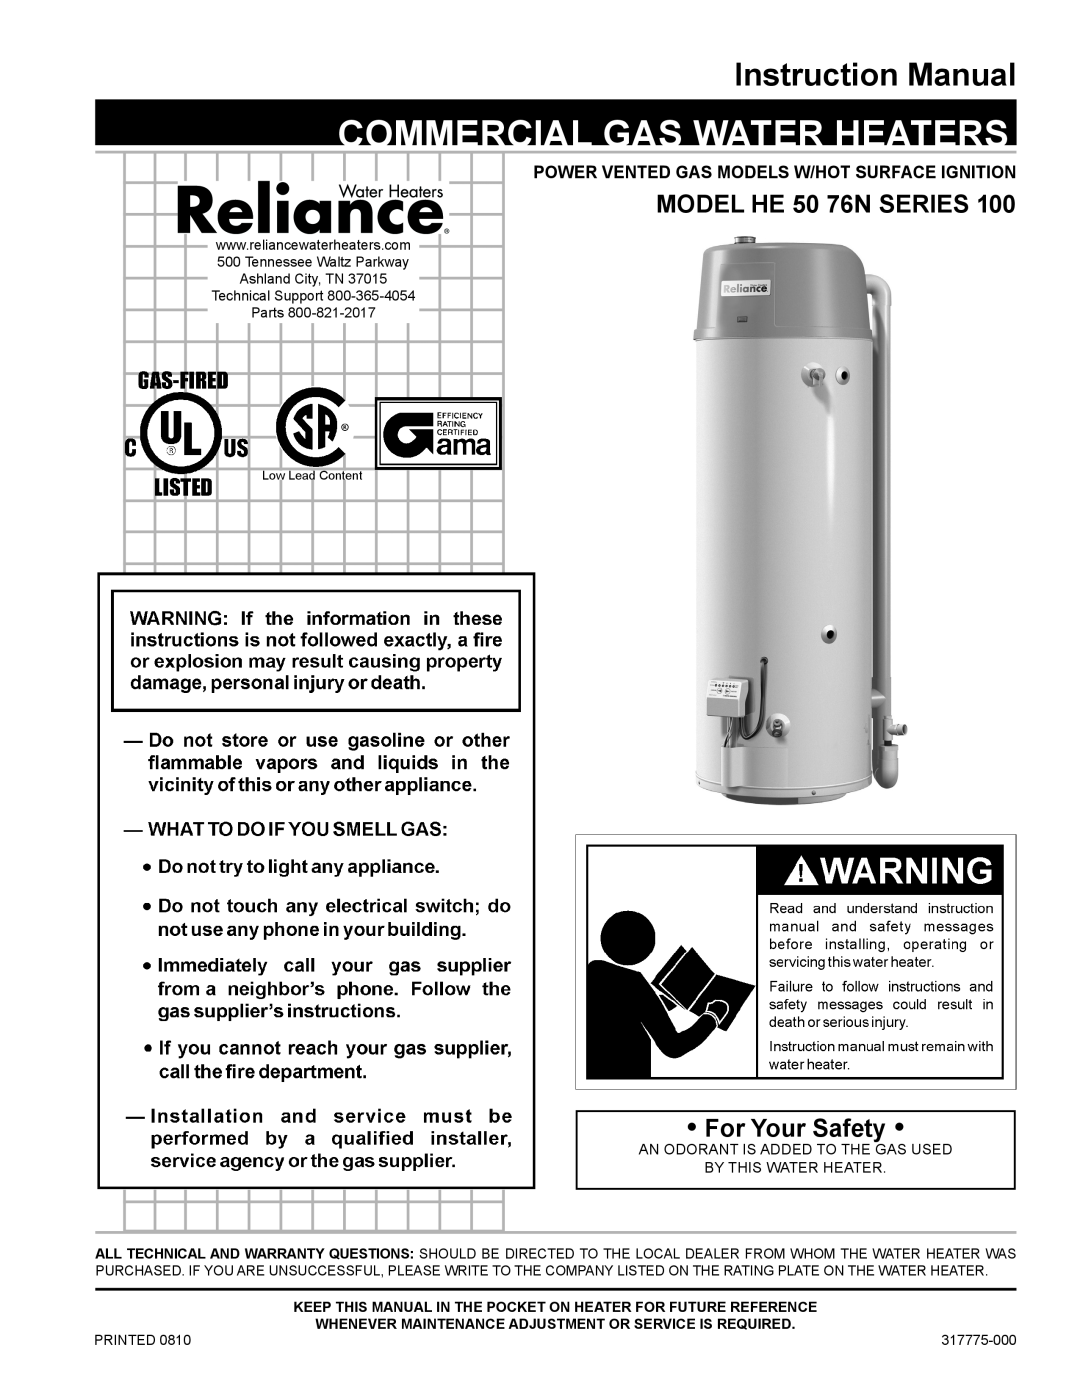 Reliance Water Heaters 317775-000 instruction manual Power Vented Gas Models W/Hot Surface Ignition, For Your Safety 